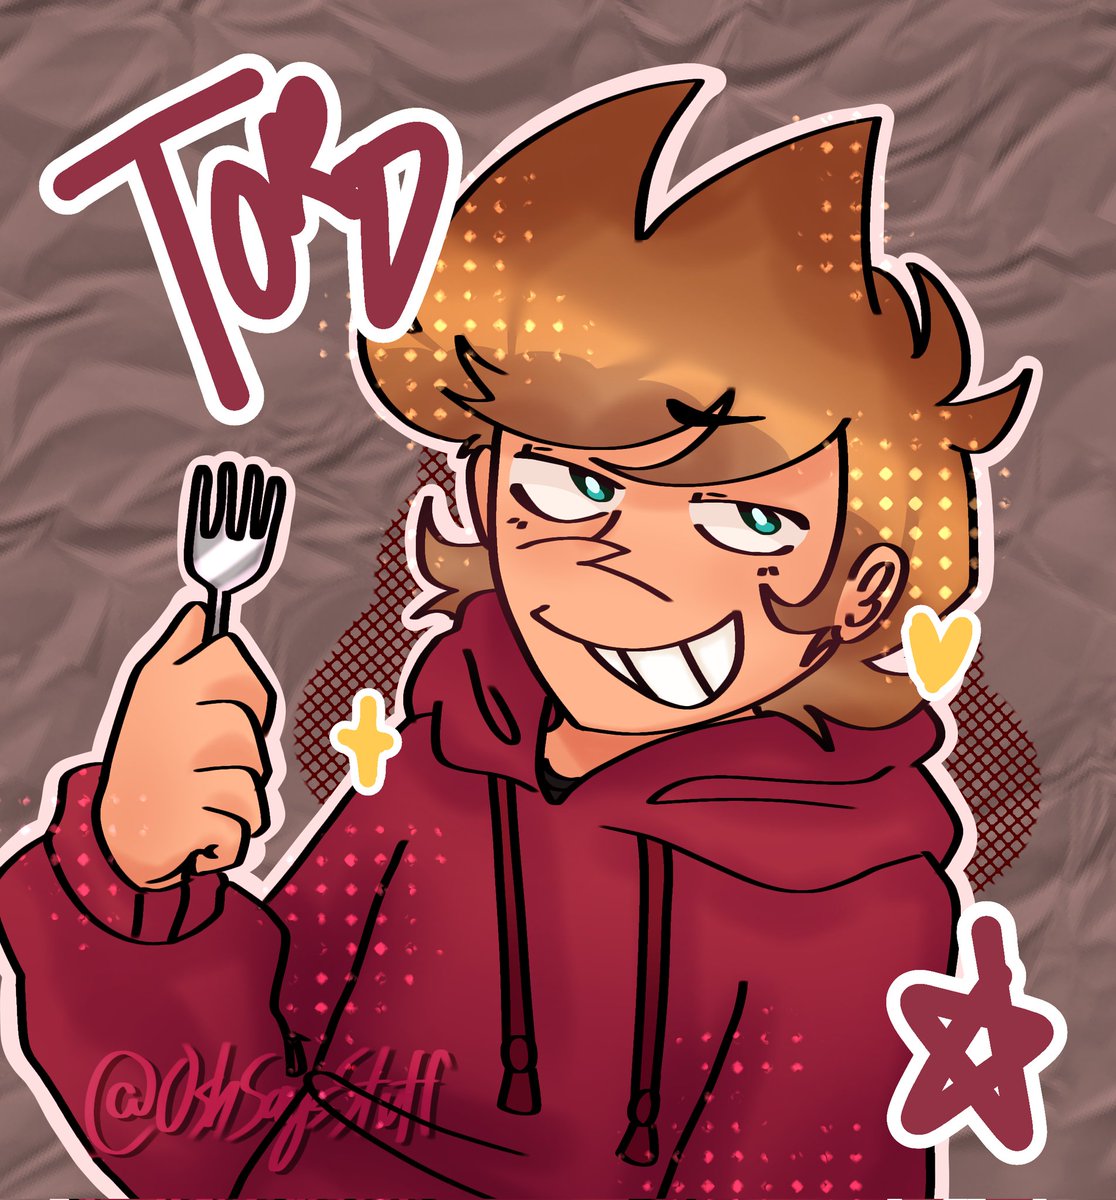 Drawing Every Eddsworld Character Everyday...?
———
Day 4: Tord 🔧

#eddsworld